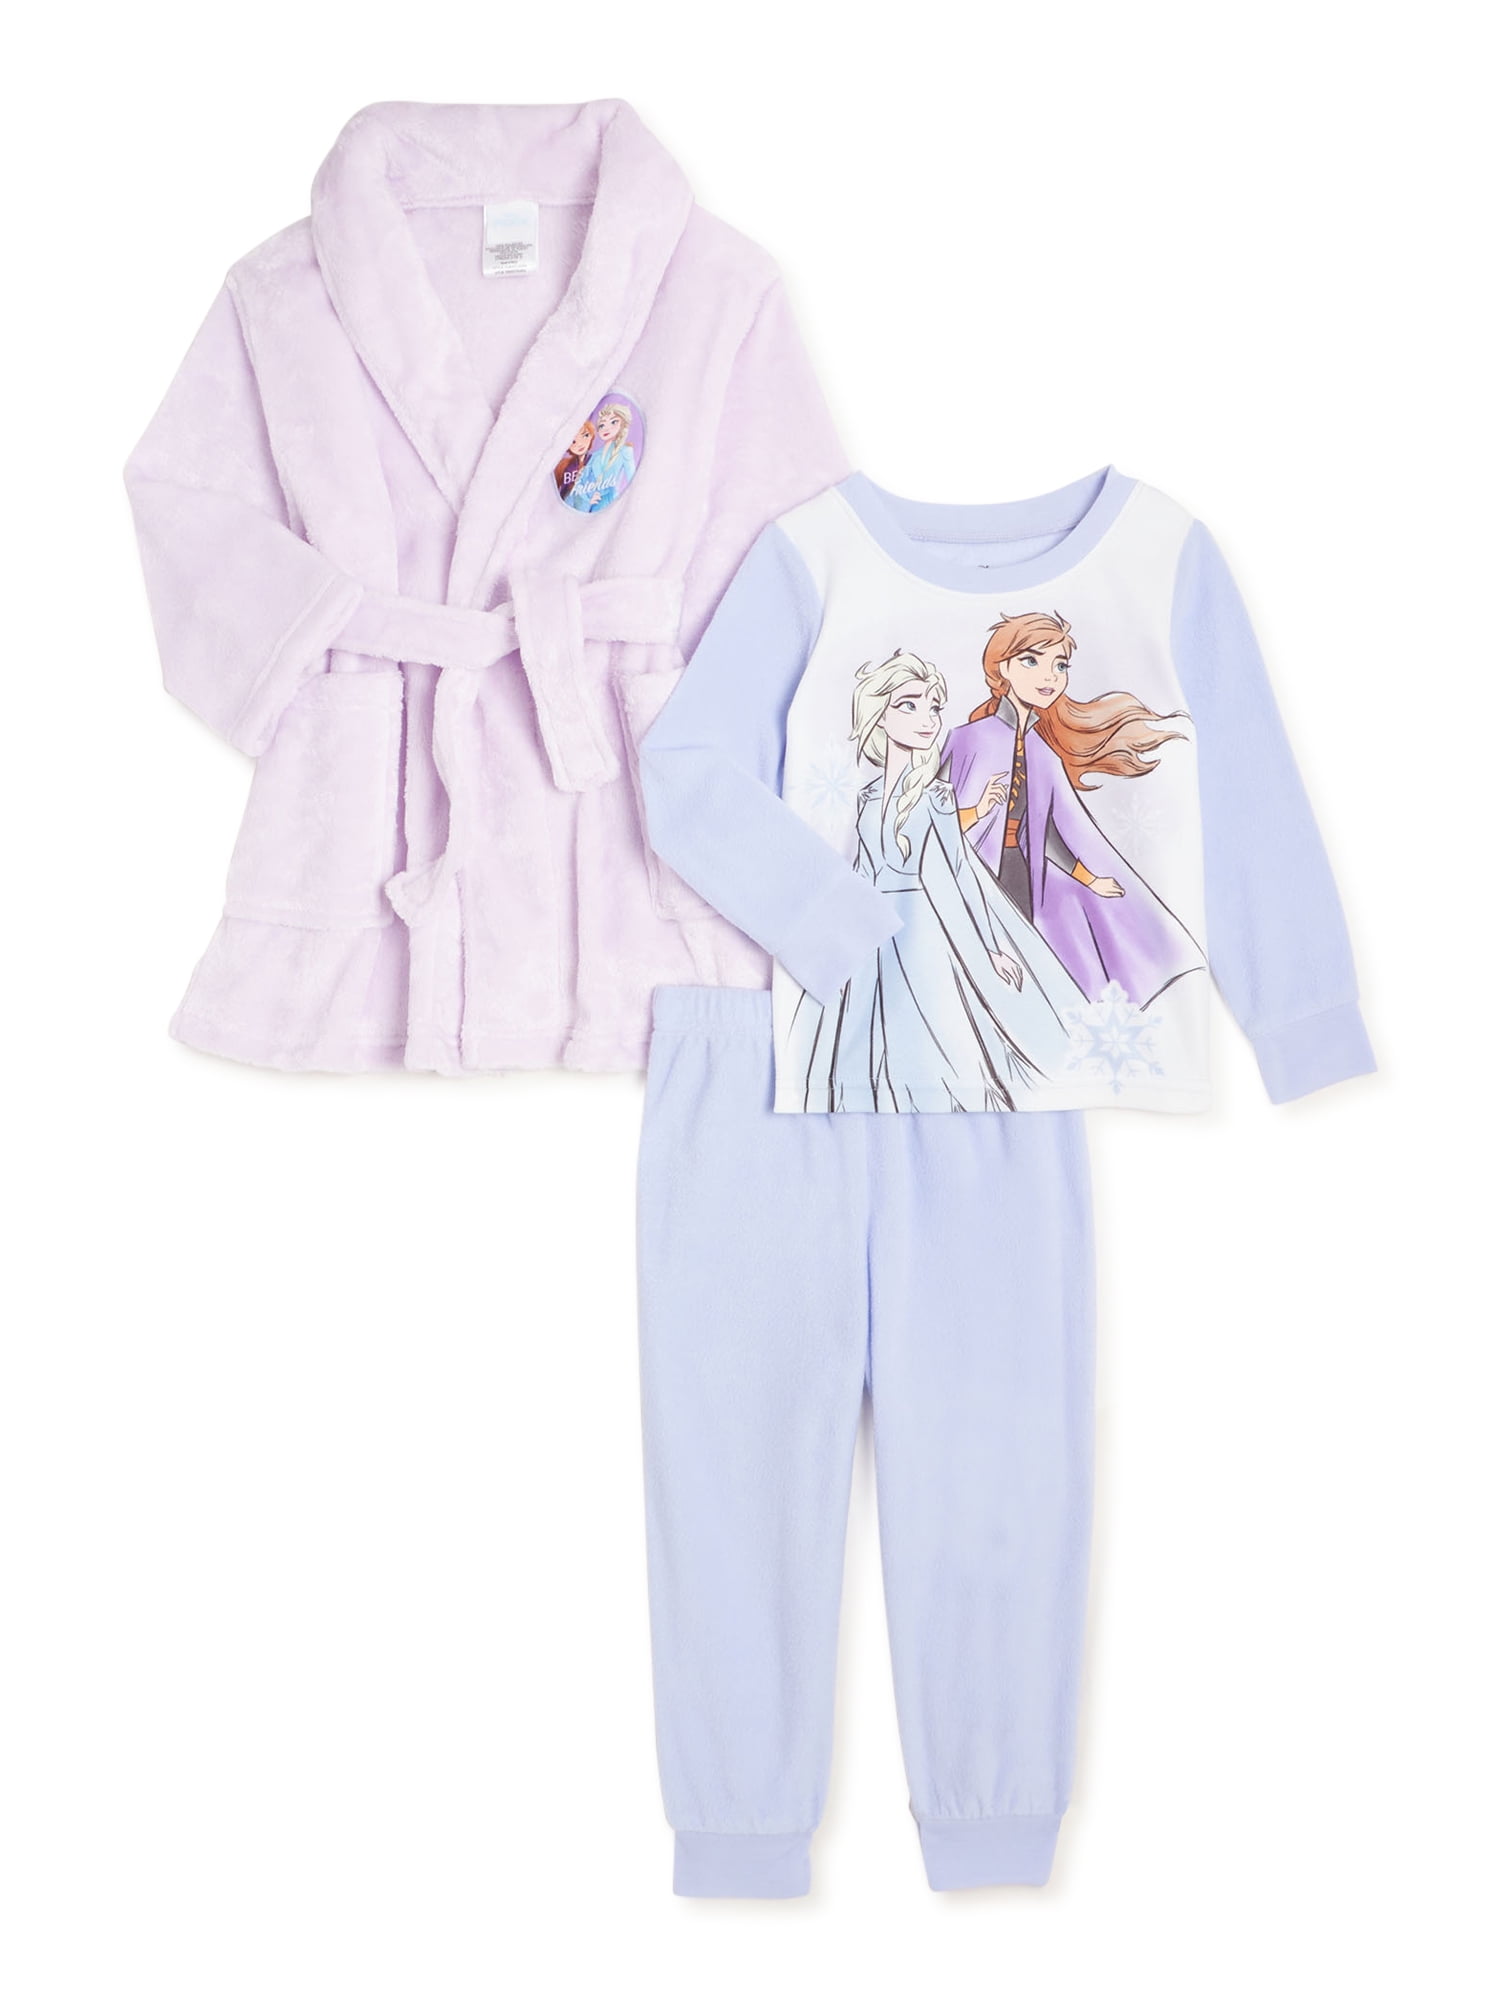 Details about   Girl’s Toddler DISNEY'S FROZEN 2  3 Piece Pajama Set Size 2T NWT 